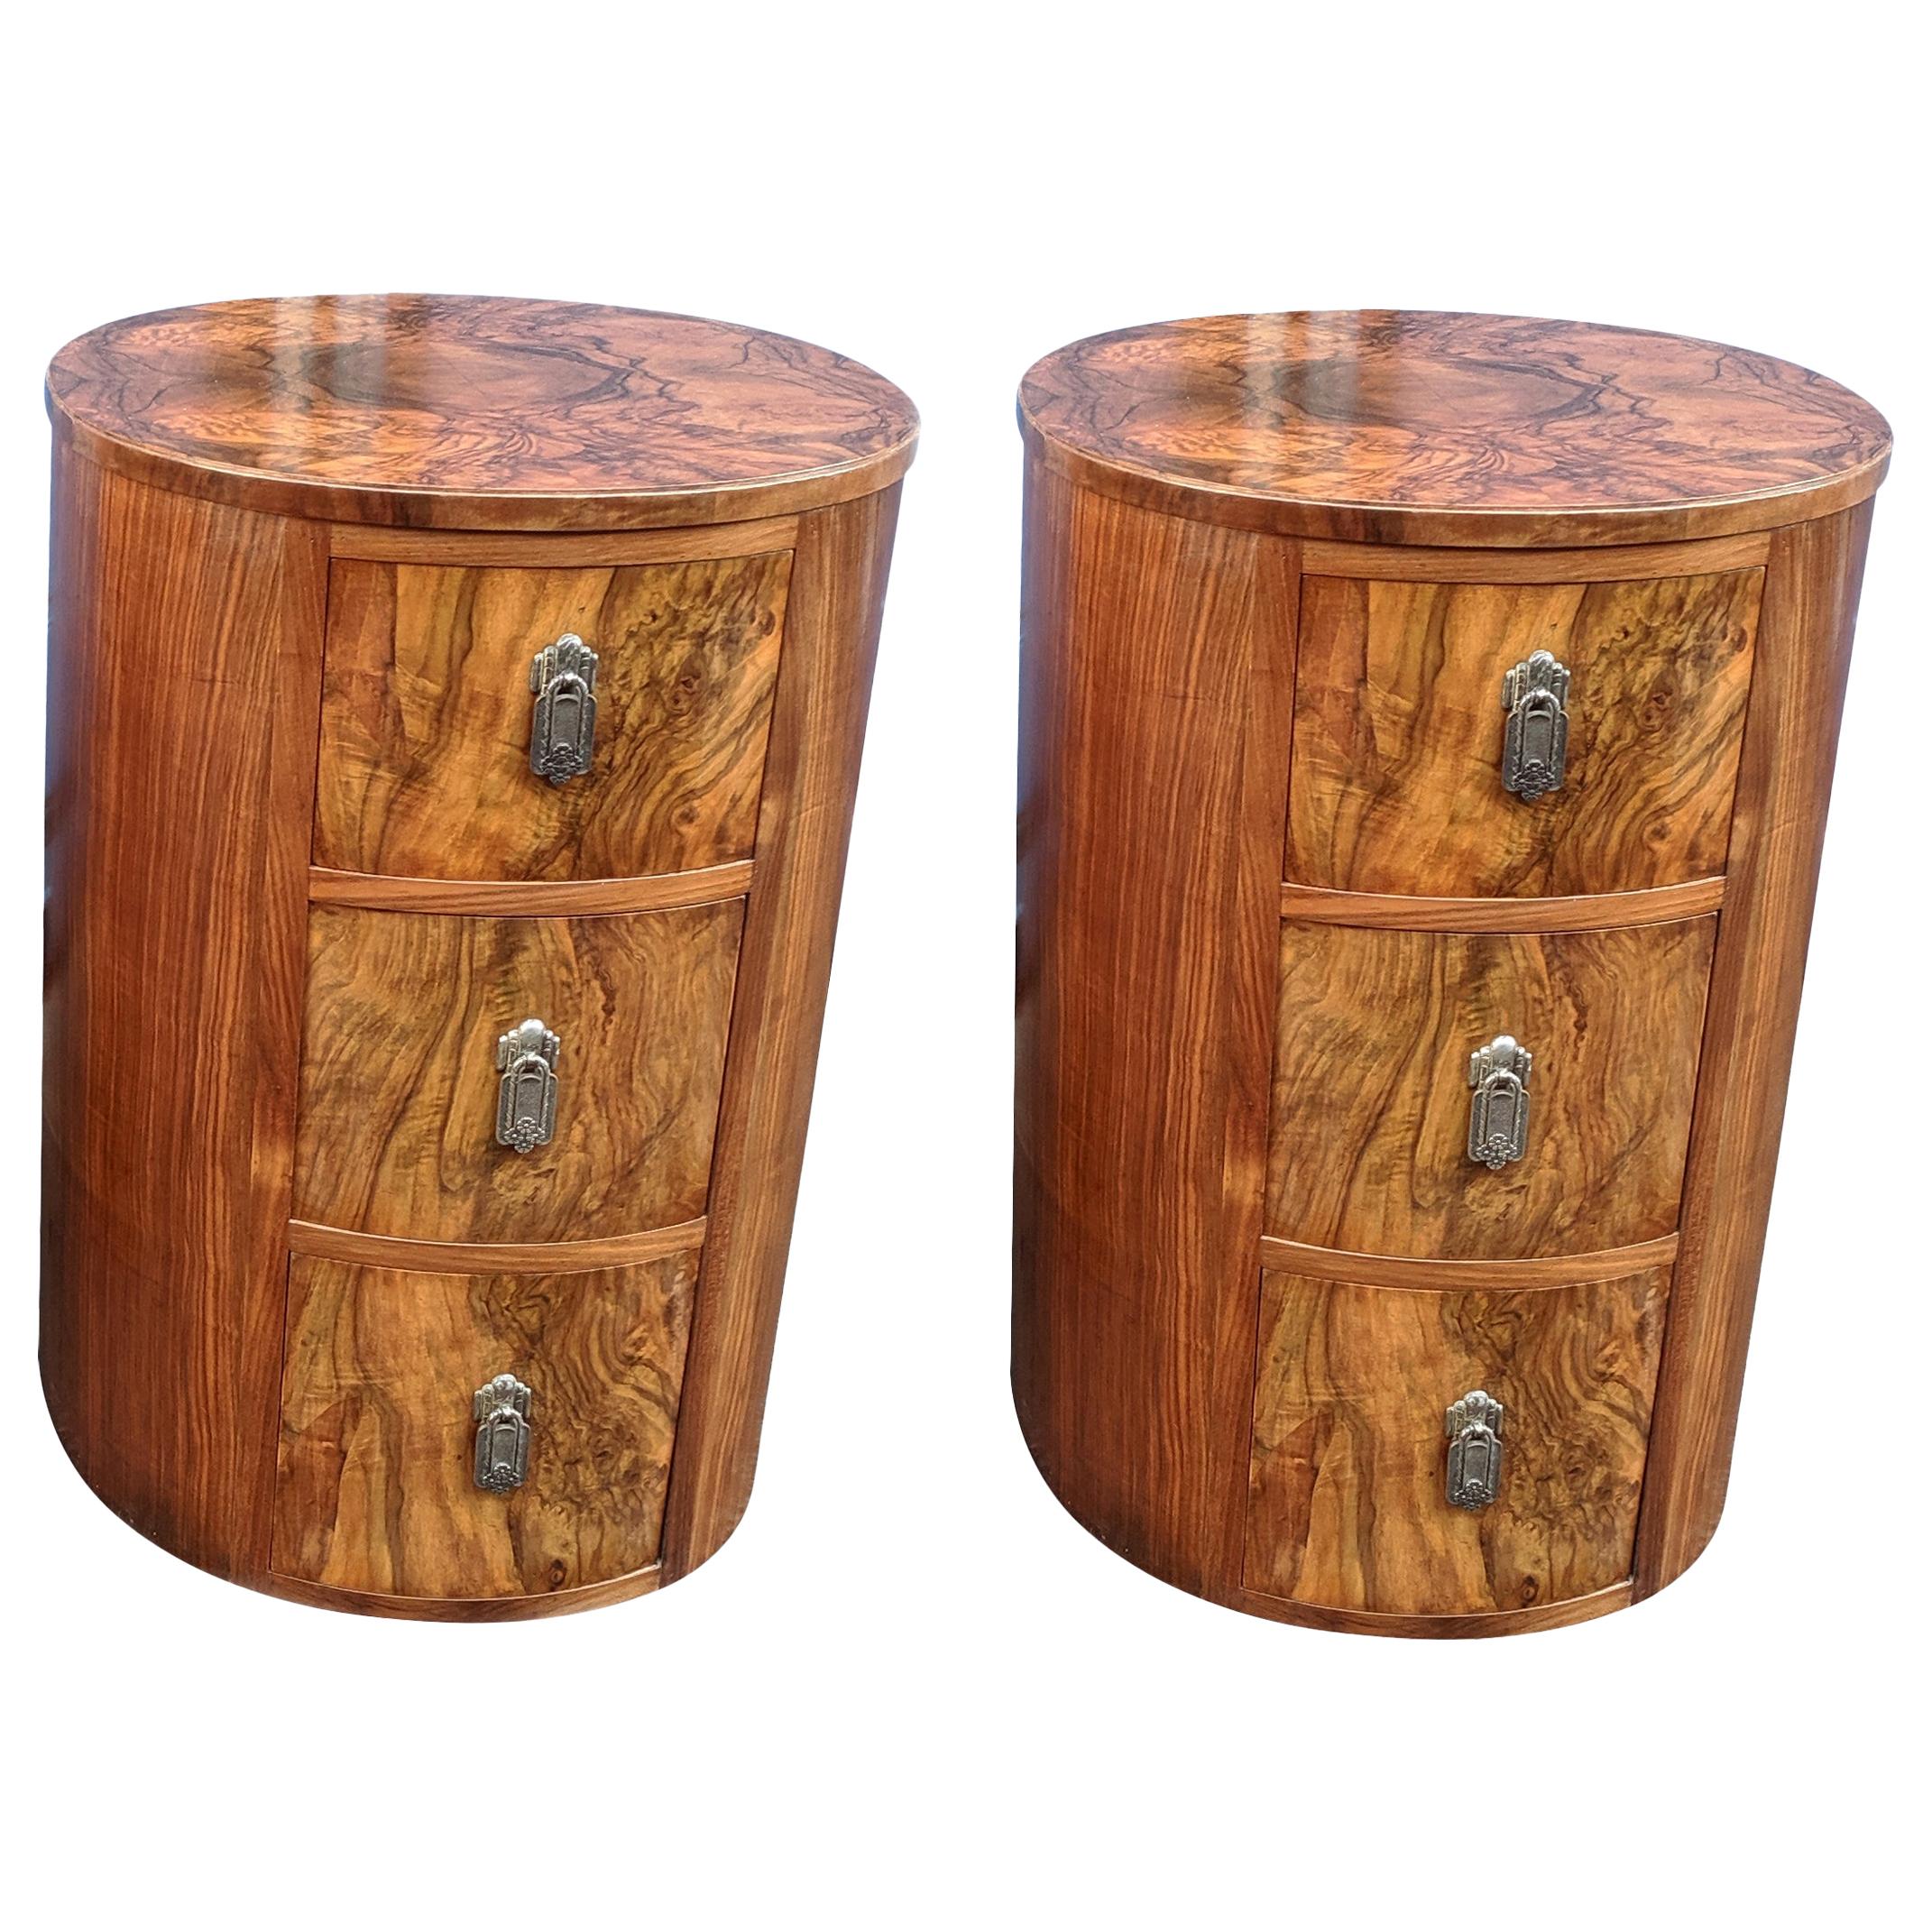 Matching Pair of Art Deco Oval Shaped Bedside Cabinet Tables, circa 1930